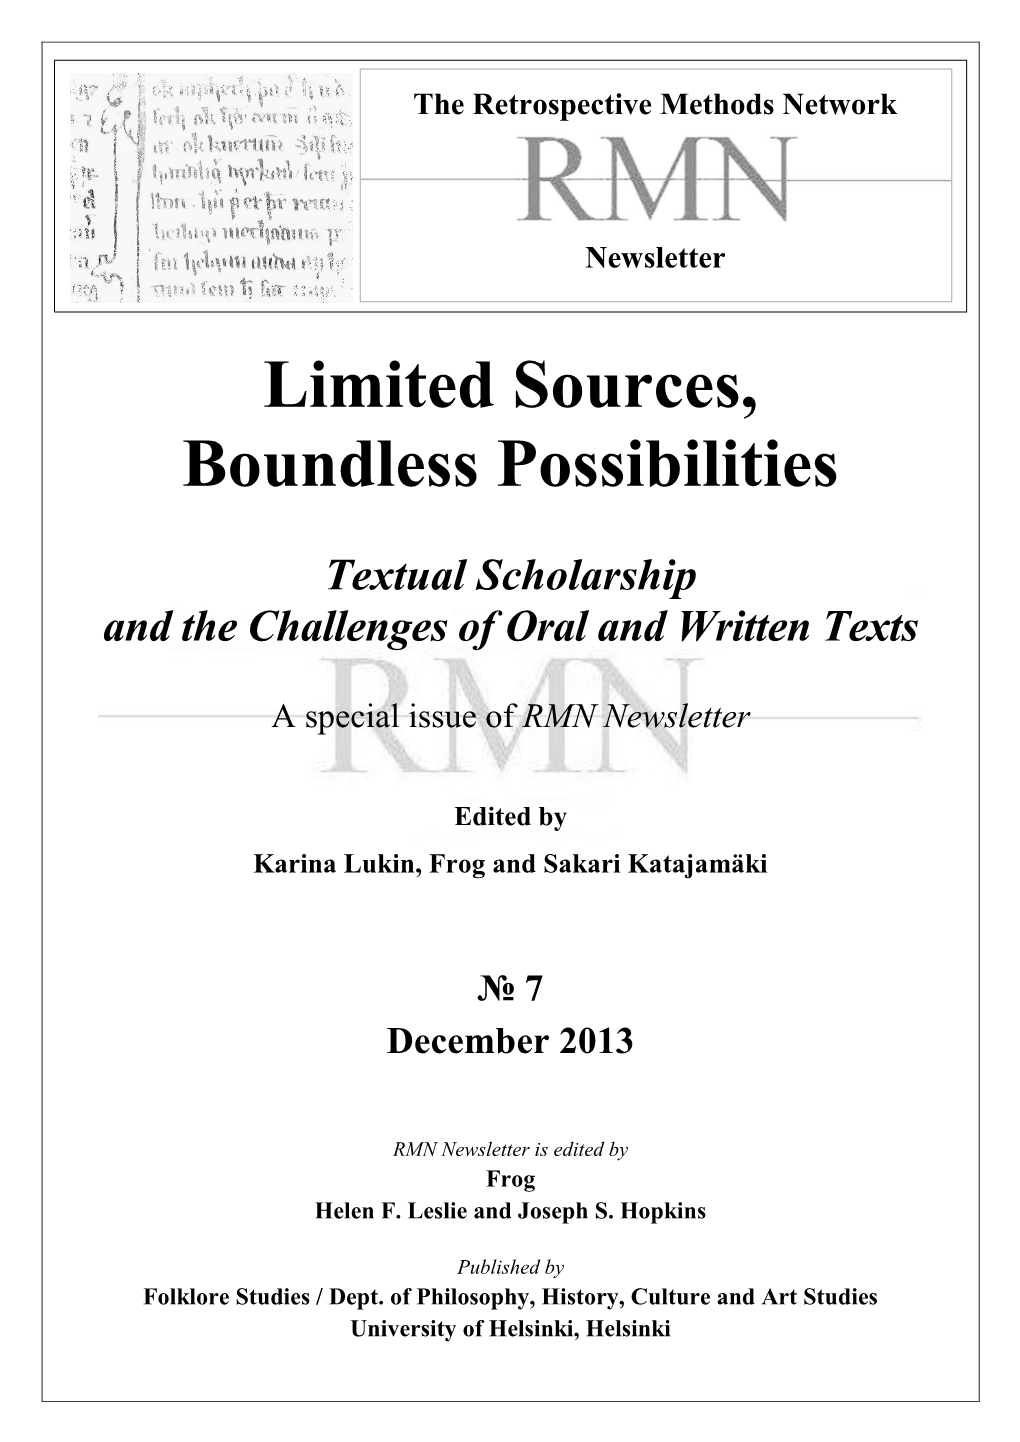 RMN Newsletter 7: Limited Sources, Boundless Possibilities 2013